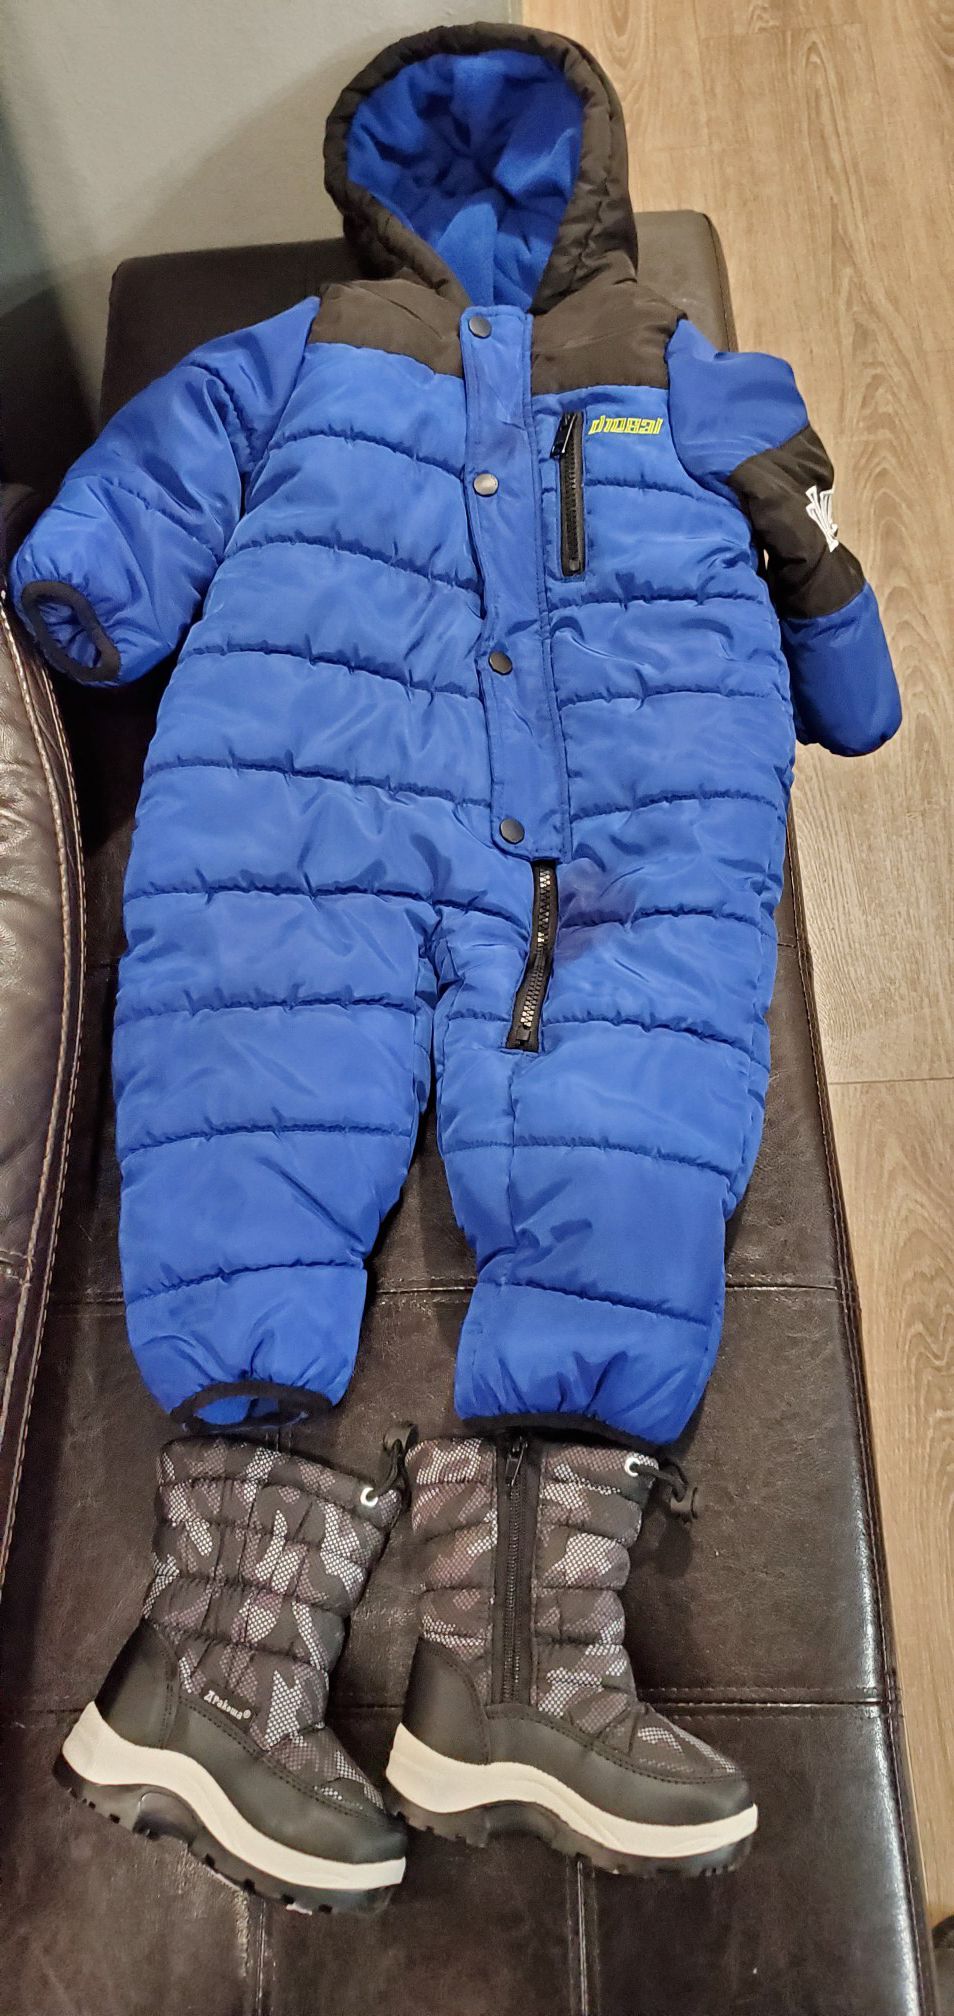 Toddler snow suit and boots